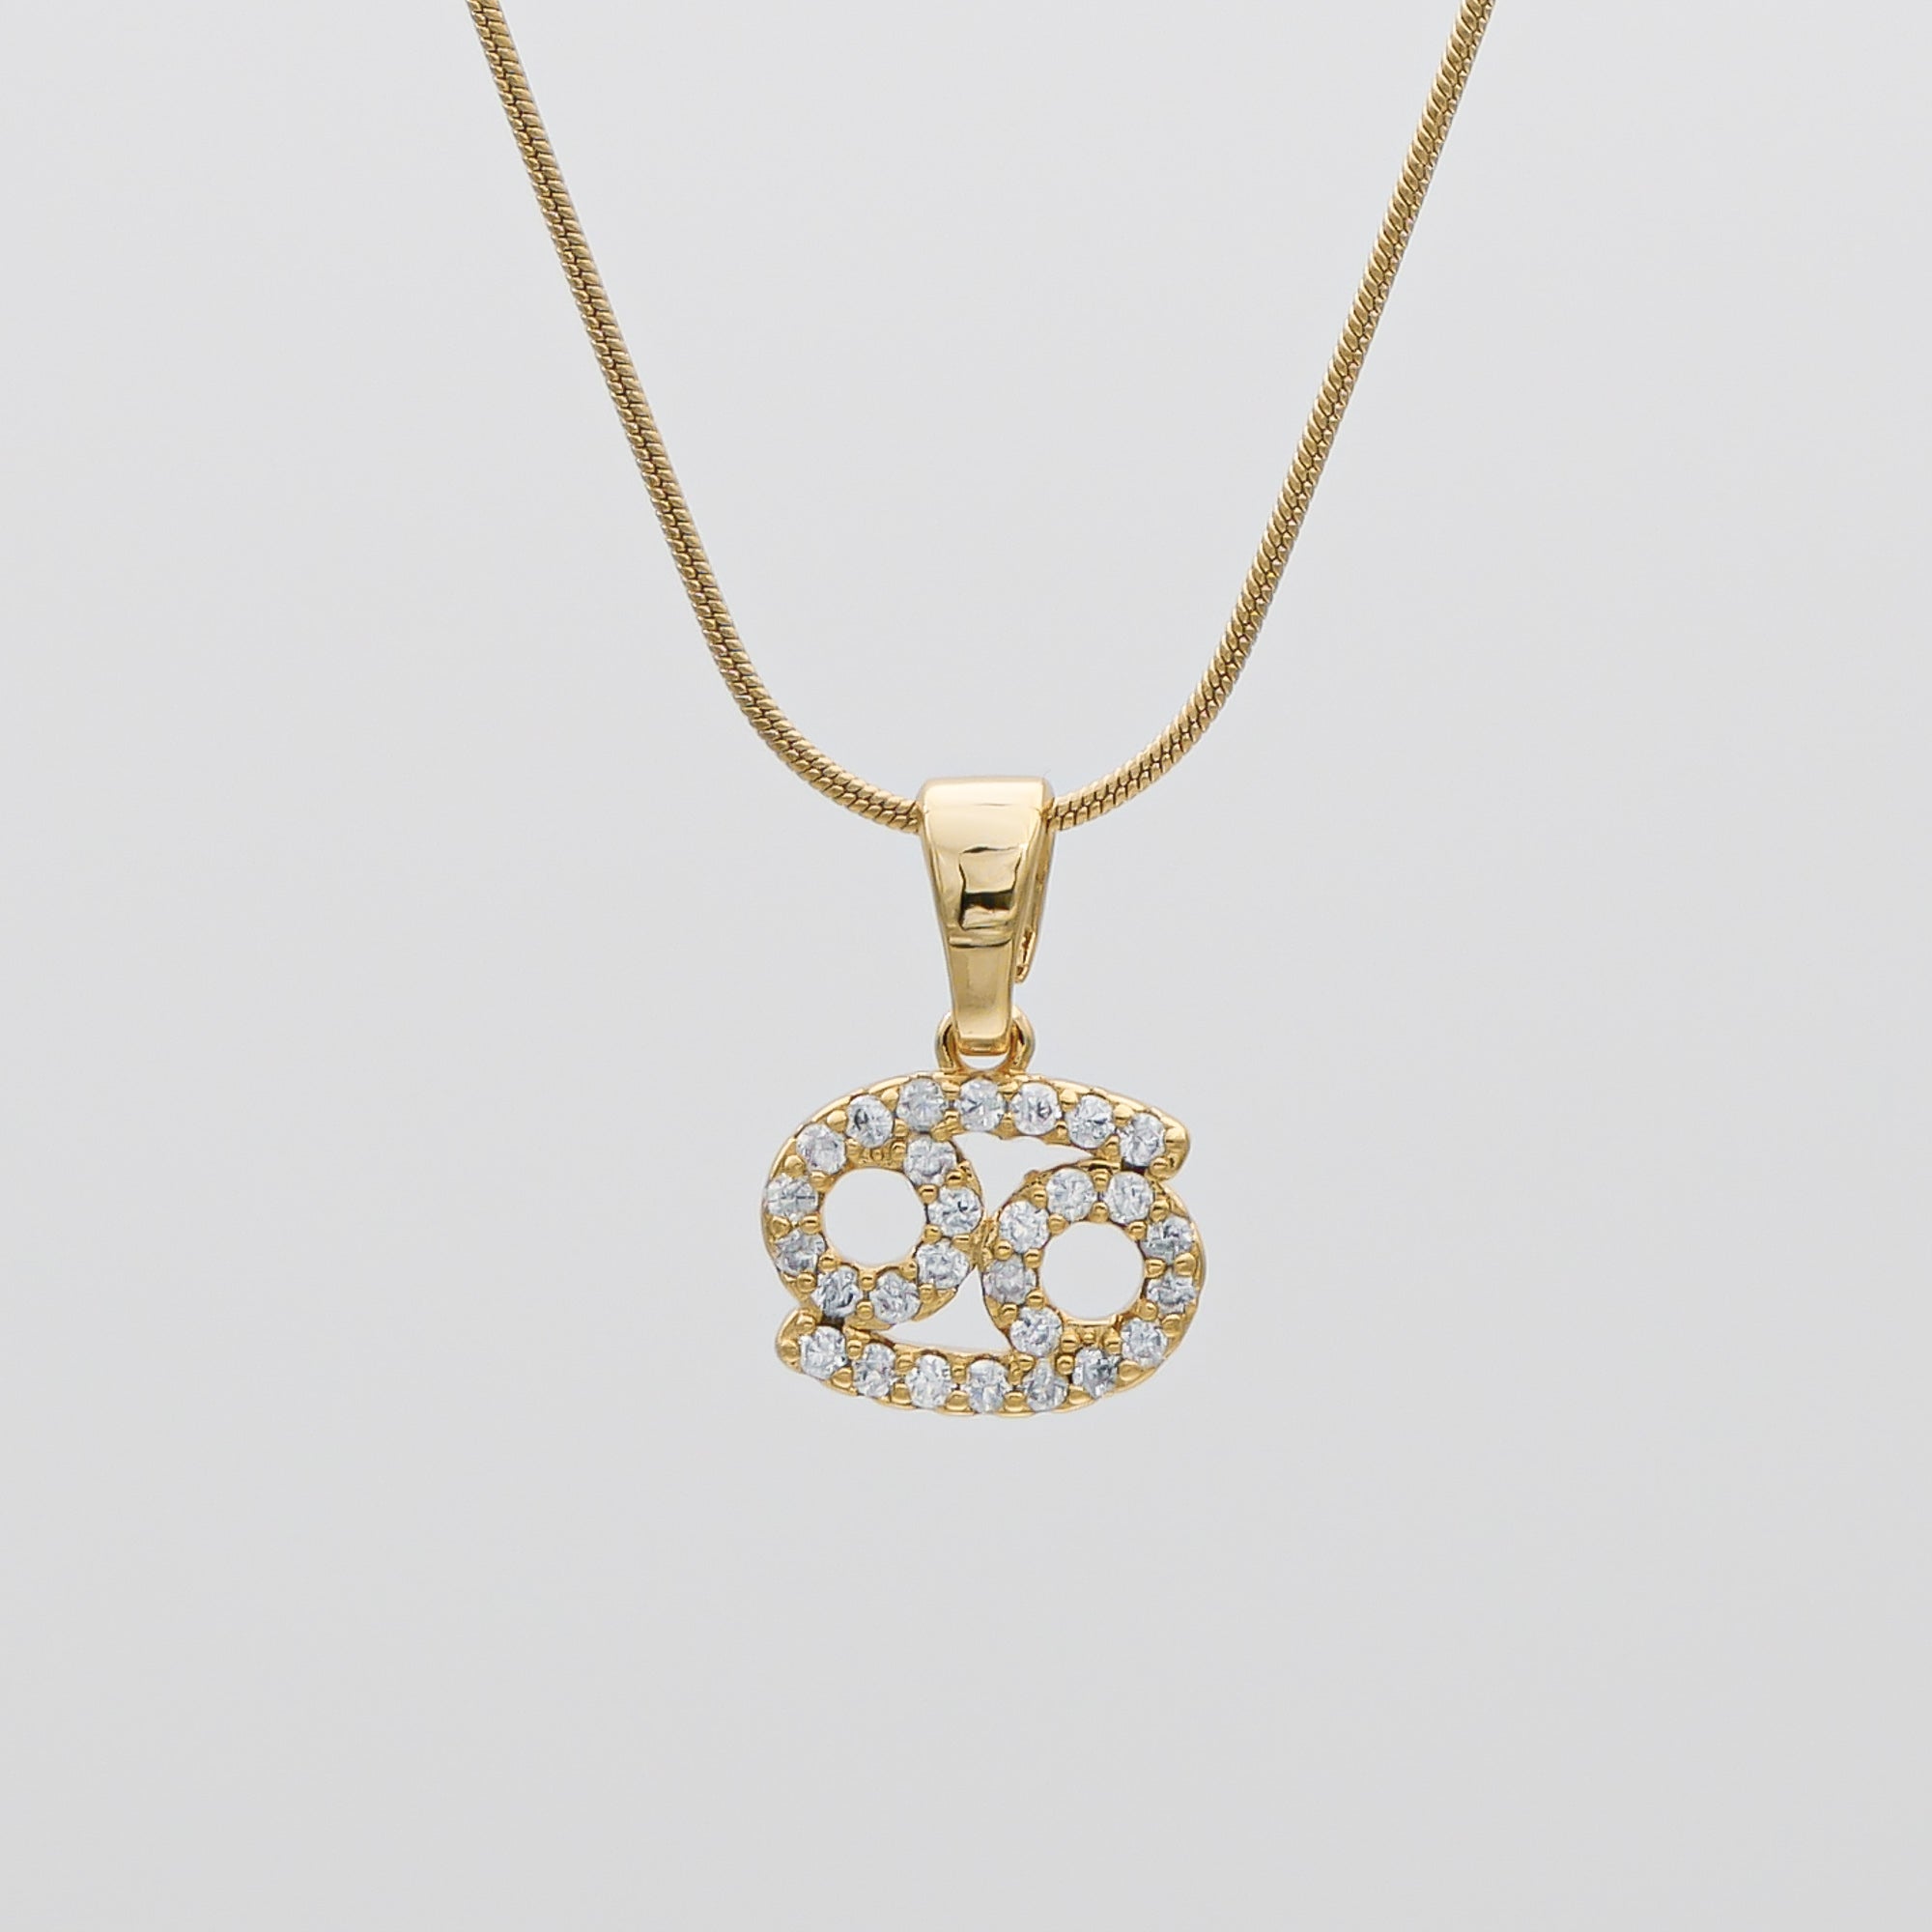 Gold ICY Zodiac Cancer Symbol Pendant Necklace by PRYA